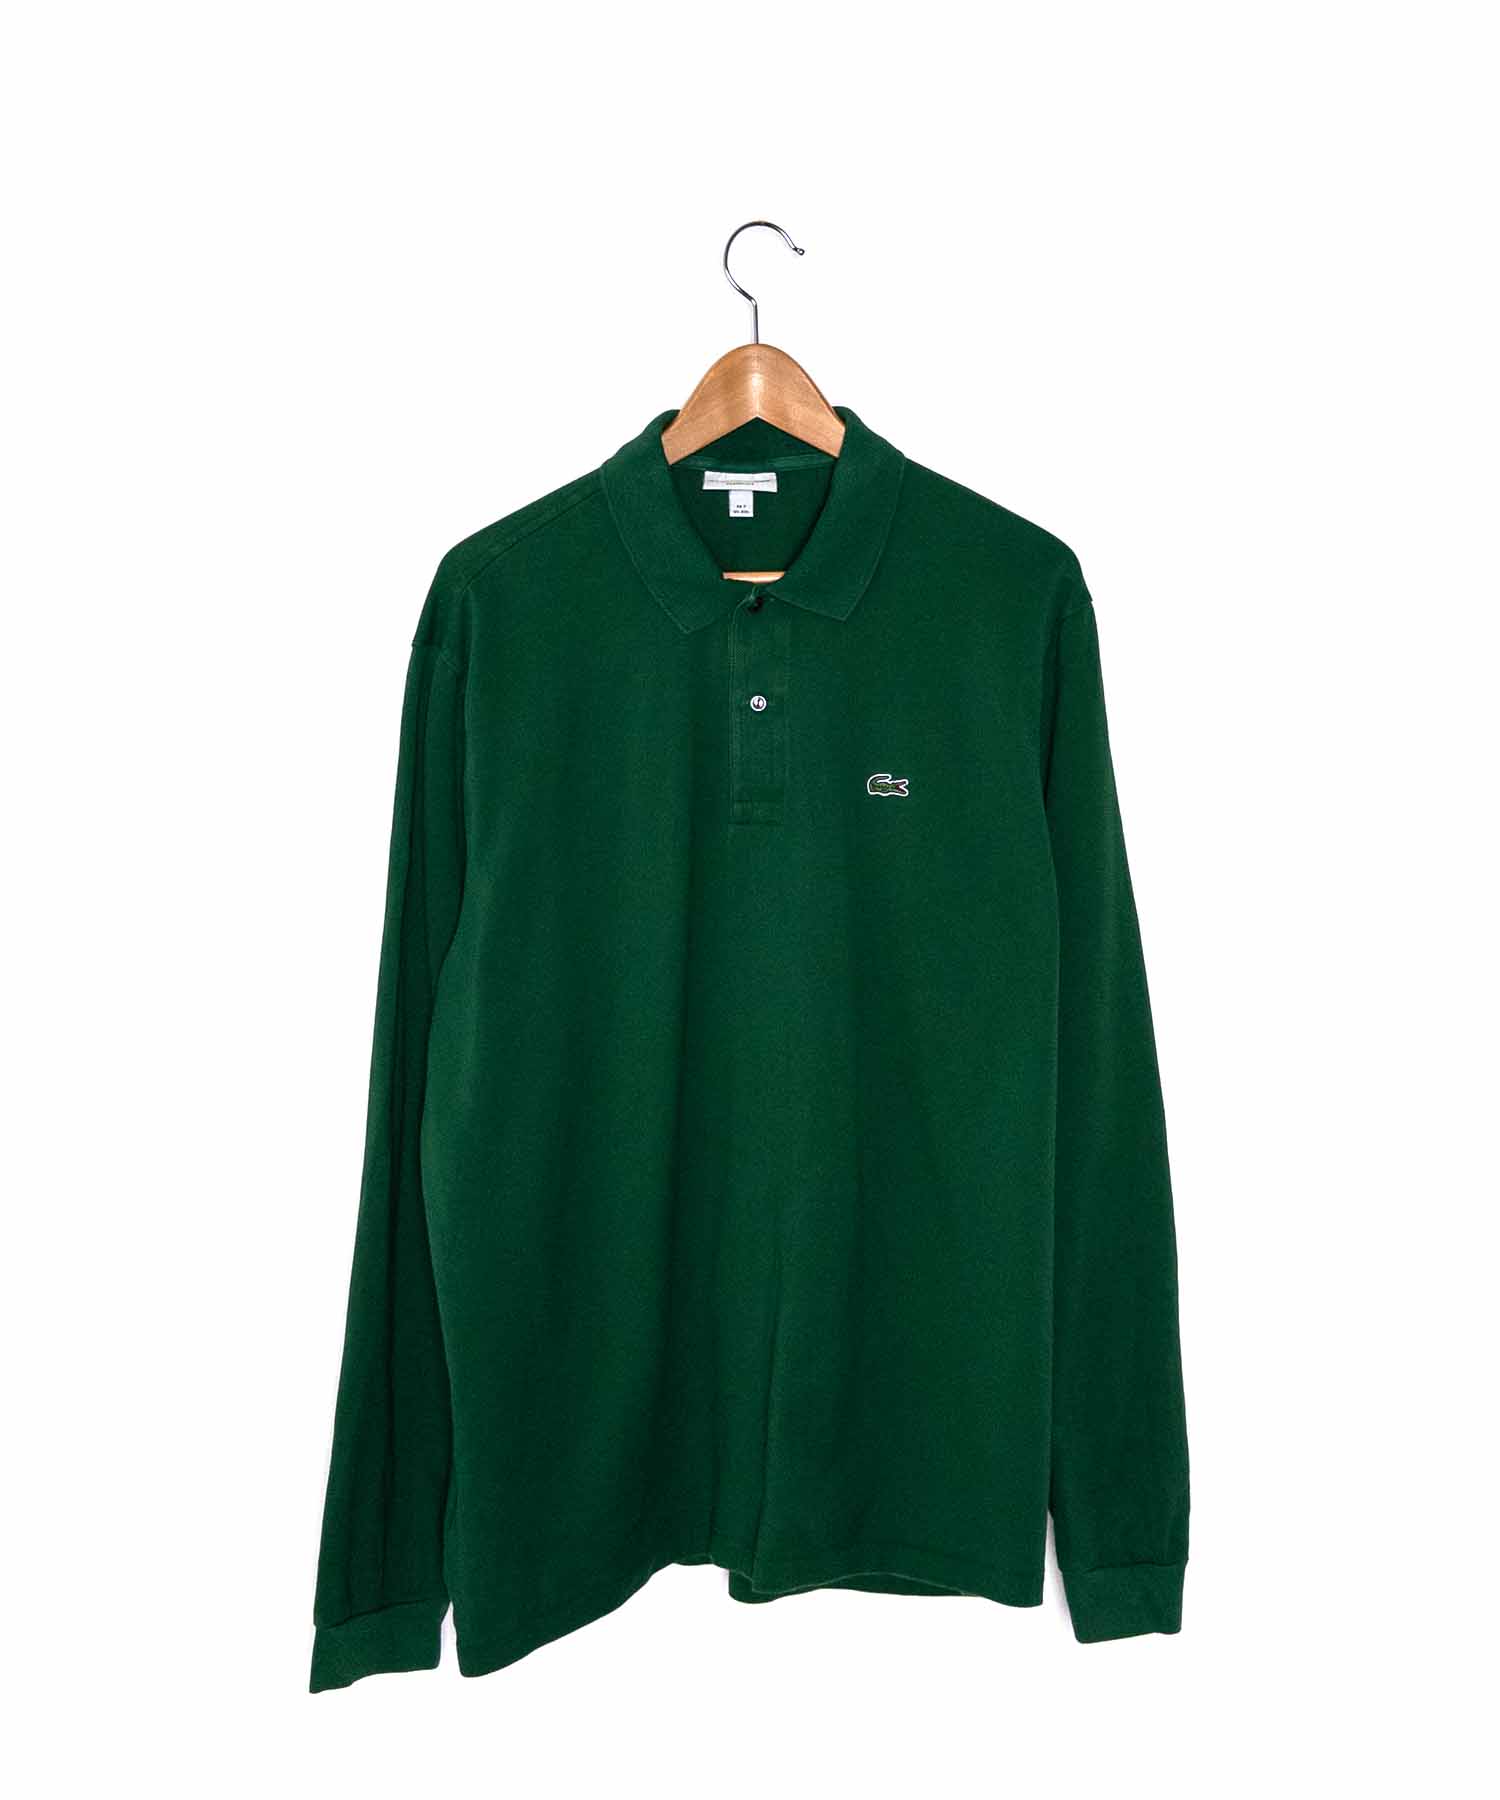 Polo Classic Fit Lacoste-Lacoste-fronte.jpg; Polo Classic Fit Lacoste-Lacoste-retro.jpg